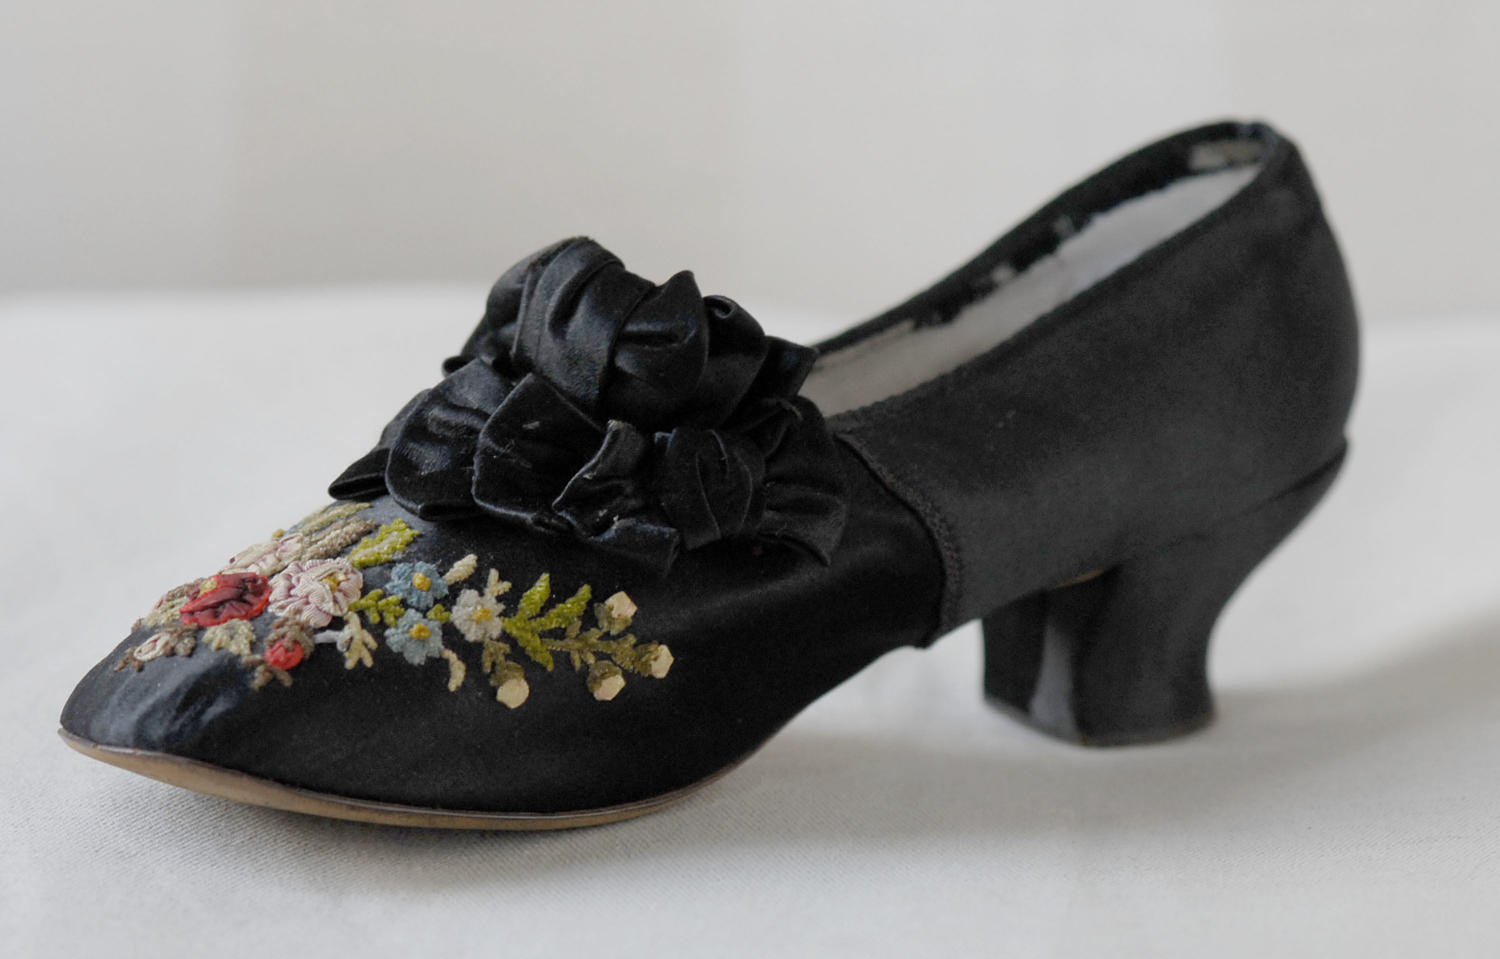 F. Pinet Flower Embroidered Shoes, circa 1870